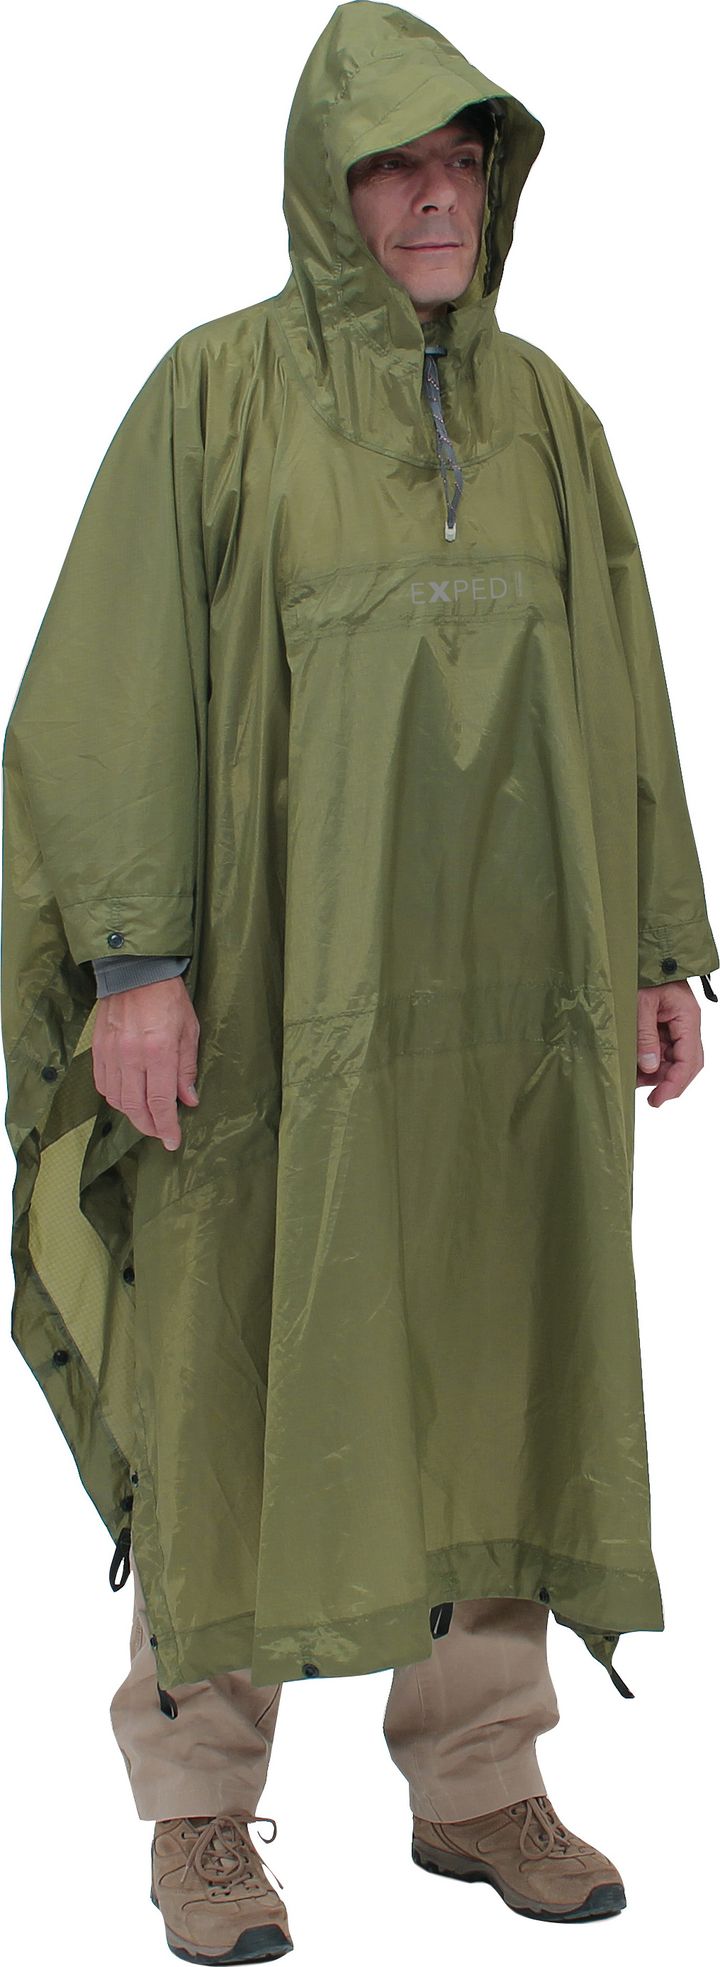 Exped Bivy Poncho Moss Exped